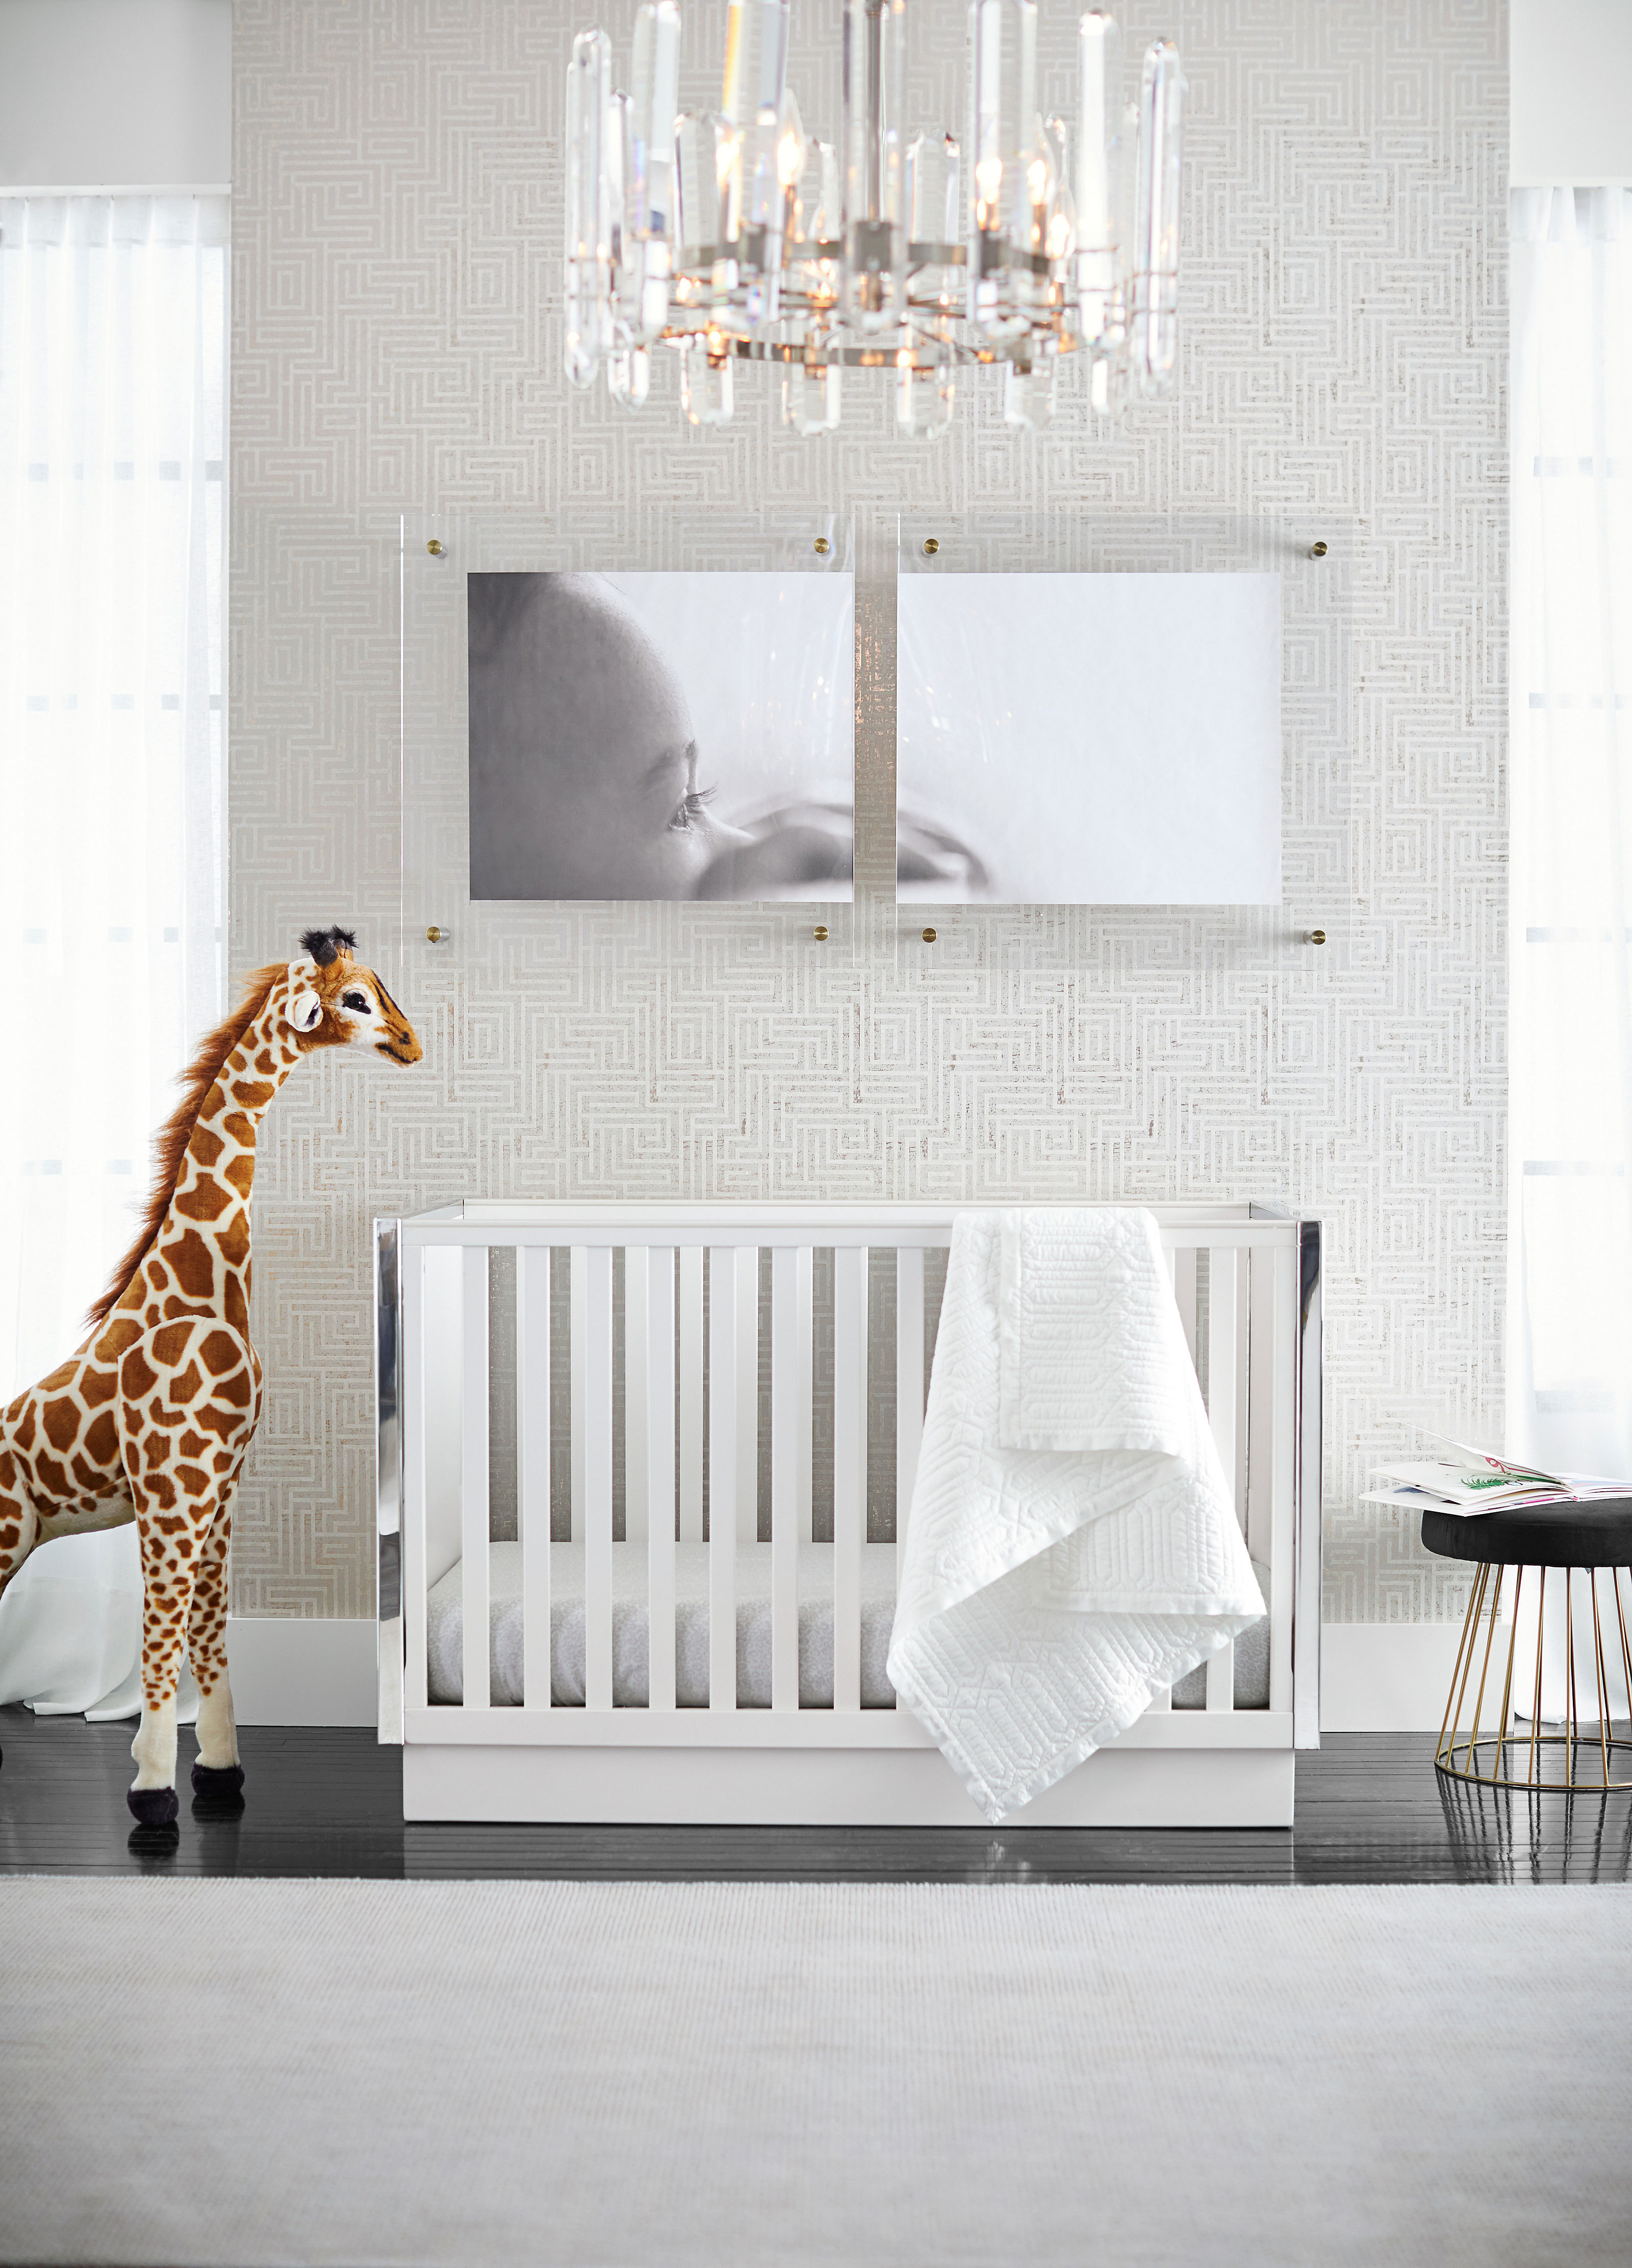 Pottery Barn Kids Debuts New High Style Nursery Collection Pottery Barn Modern Baby Business Wire